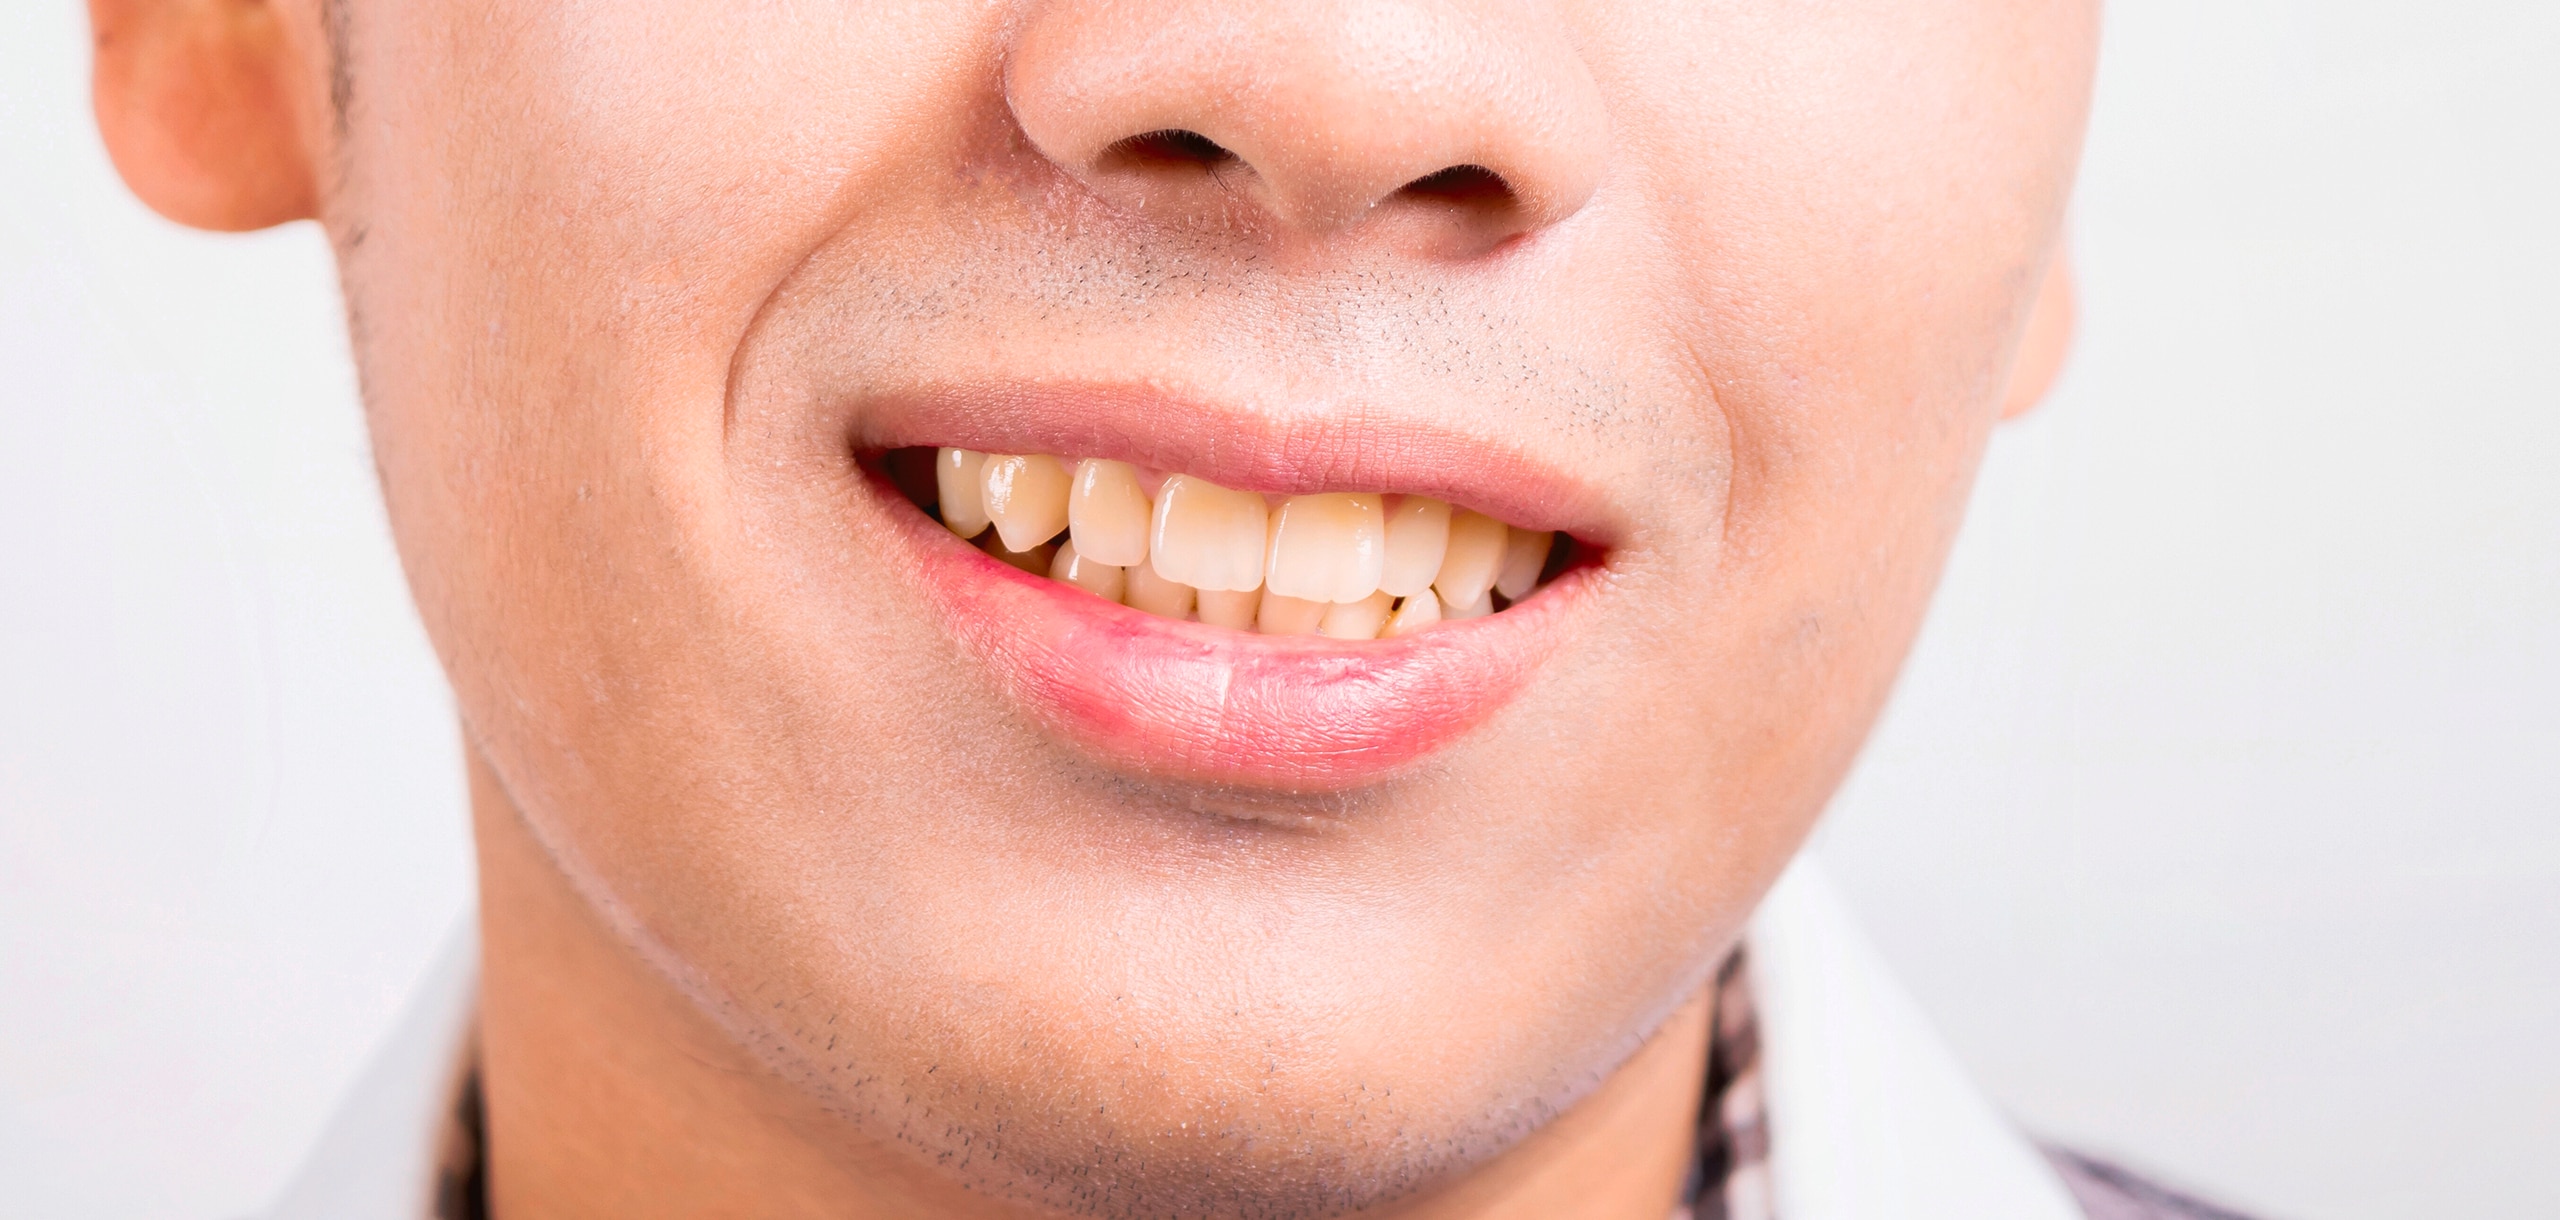 What Causes Yellow Teeth and Discolouration